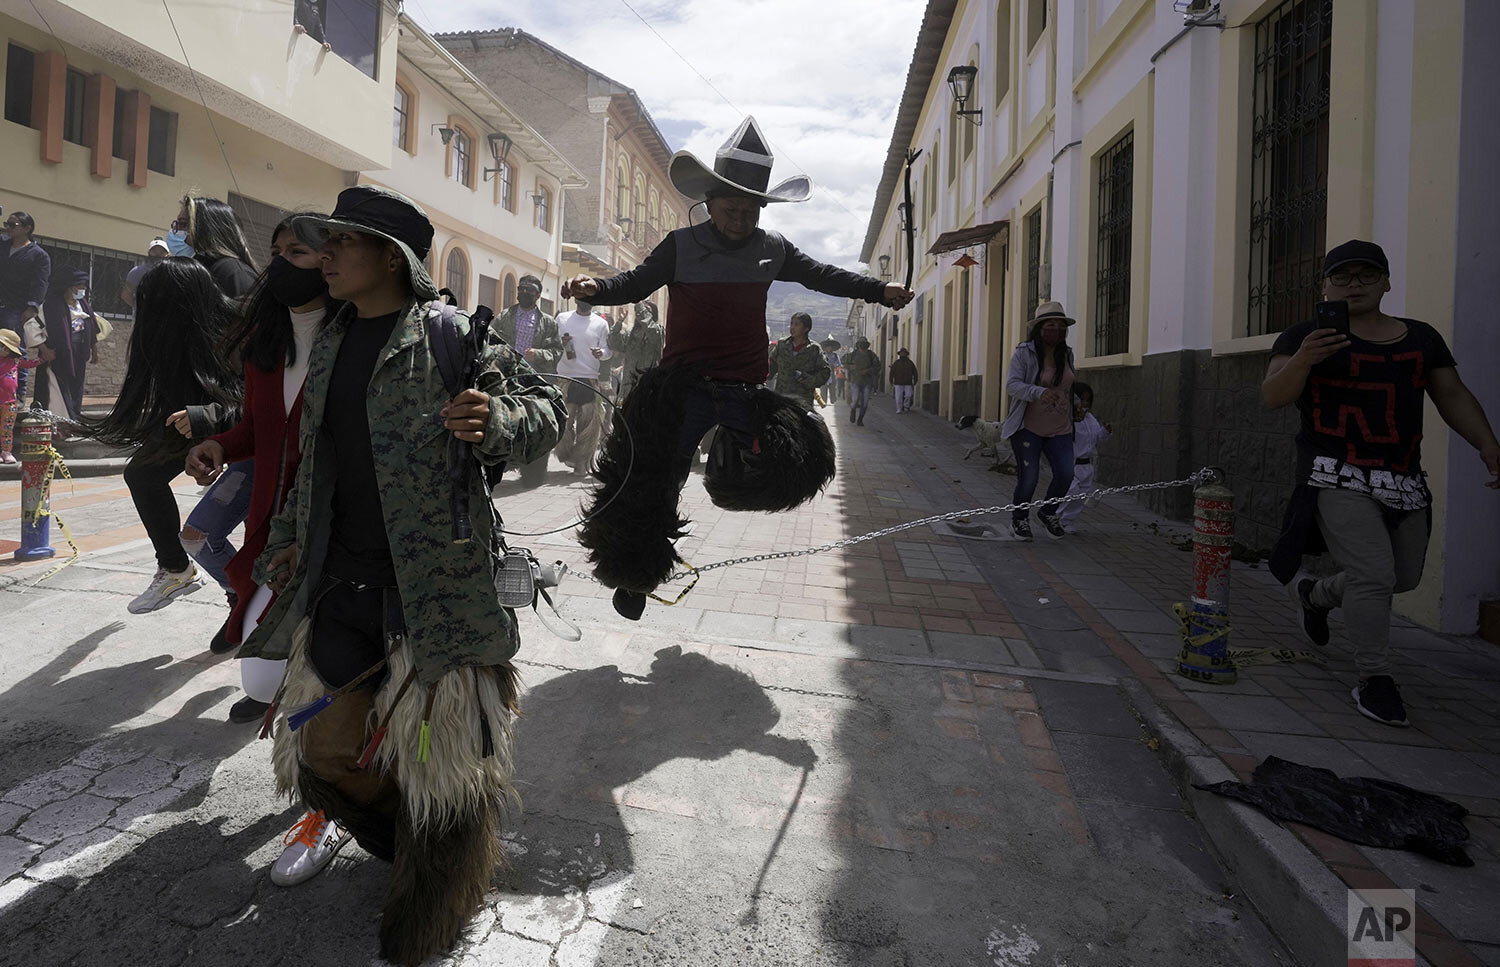  Revelers dance during the "Inti Raymi," or Sun Festival celebrations, despite restrictions to prevent the spread of the new coronavirus, in Cotacachi, Ecuador, June 24, 2021. Indigenous communities gather for the southern hemisphere's winter solstic